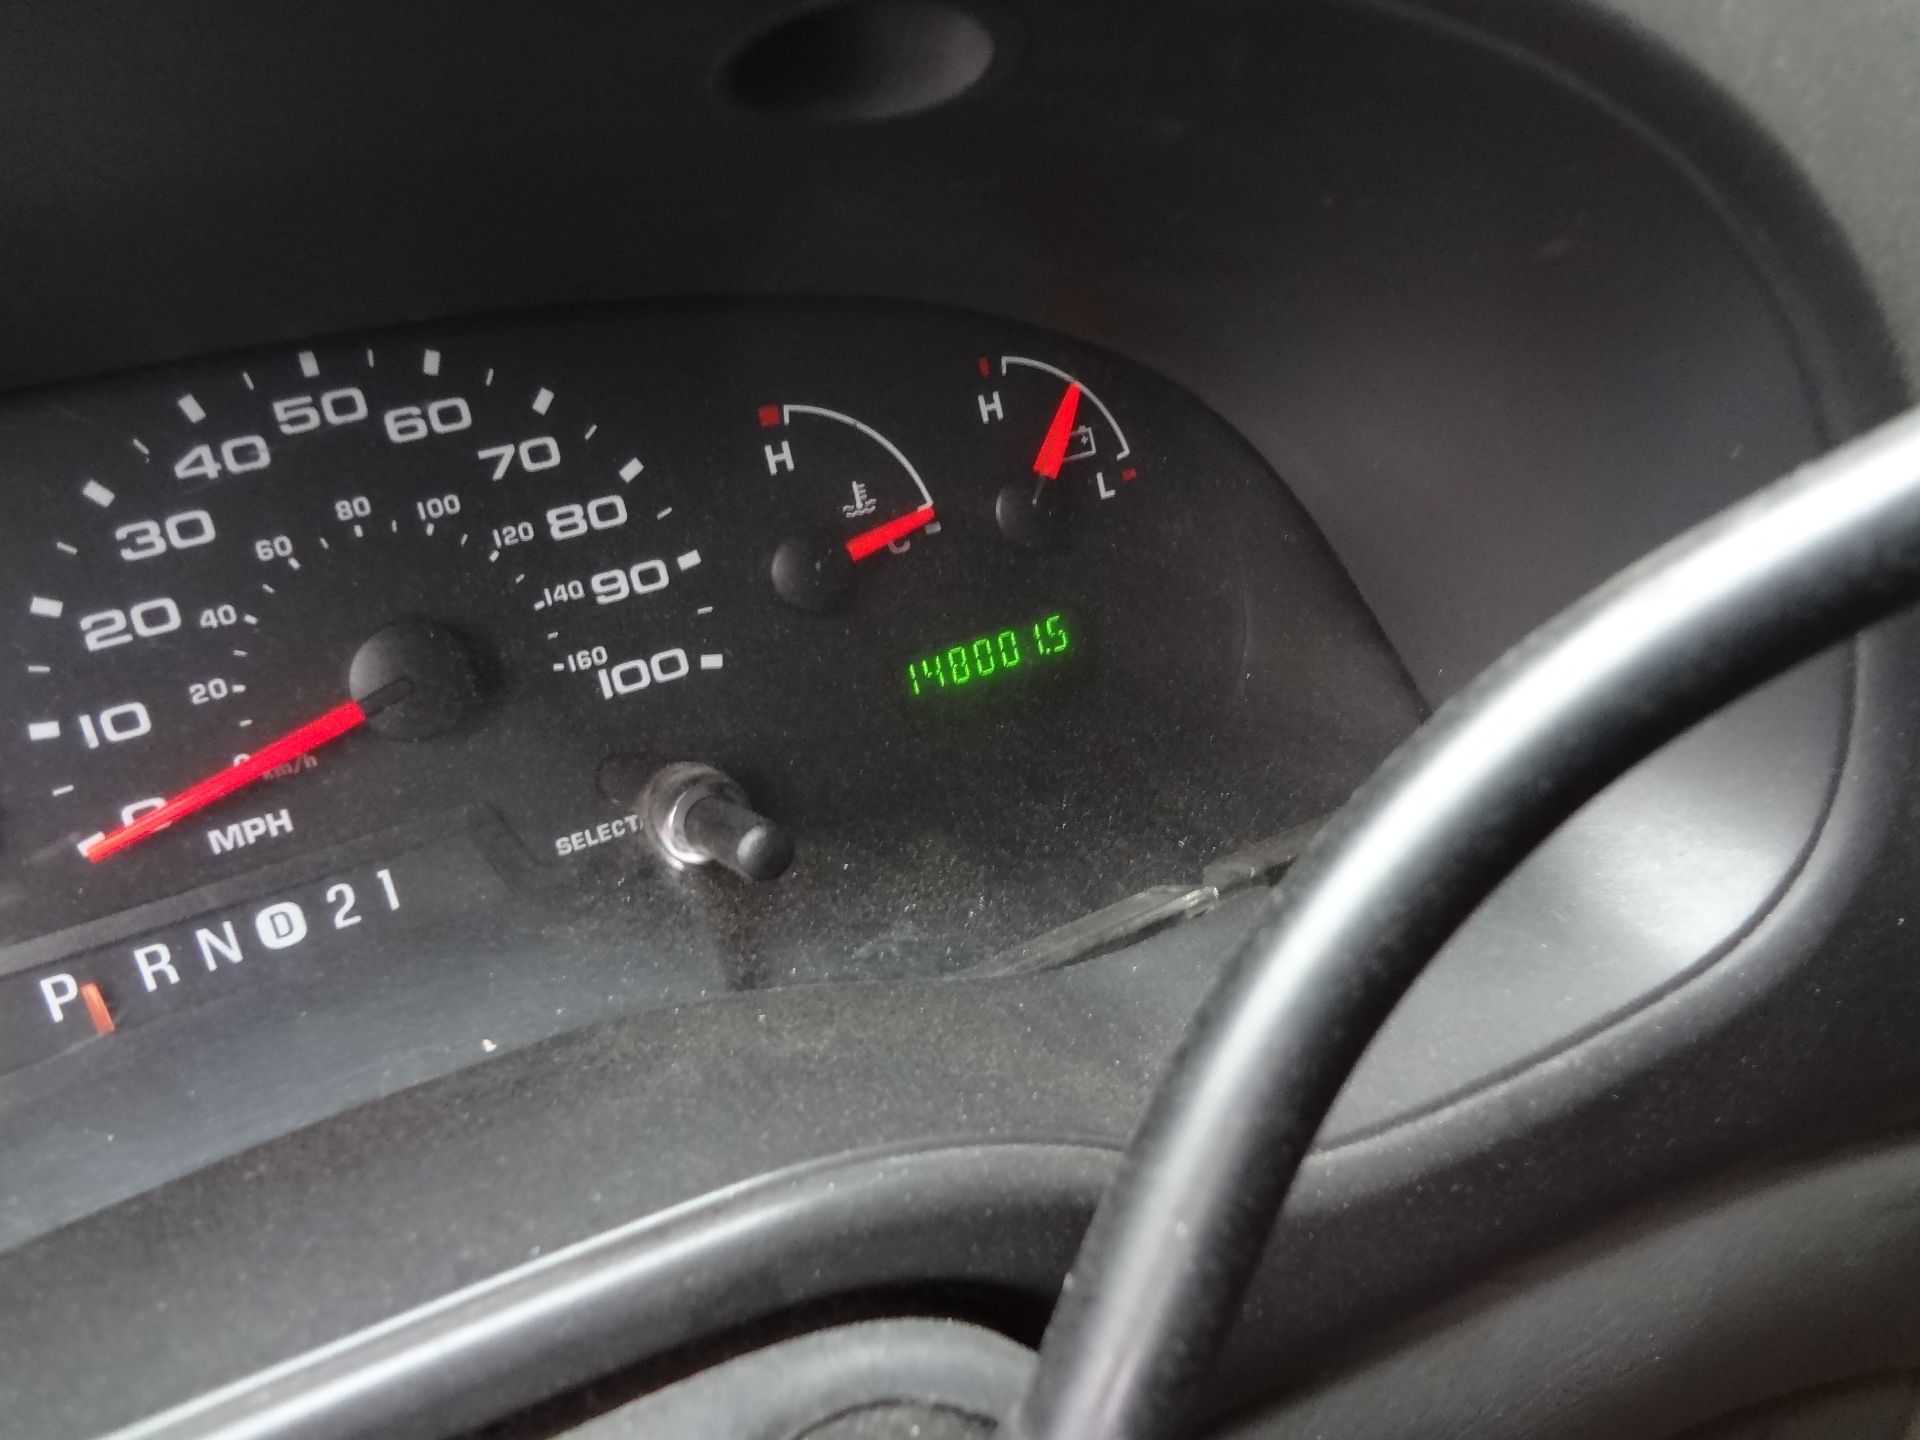 2006 FORD E-250 WORK VAN, APPROXIMATELY 148,000 MILES - Image 7 of 17